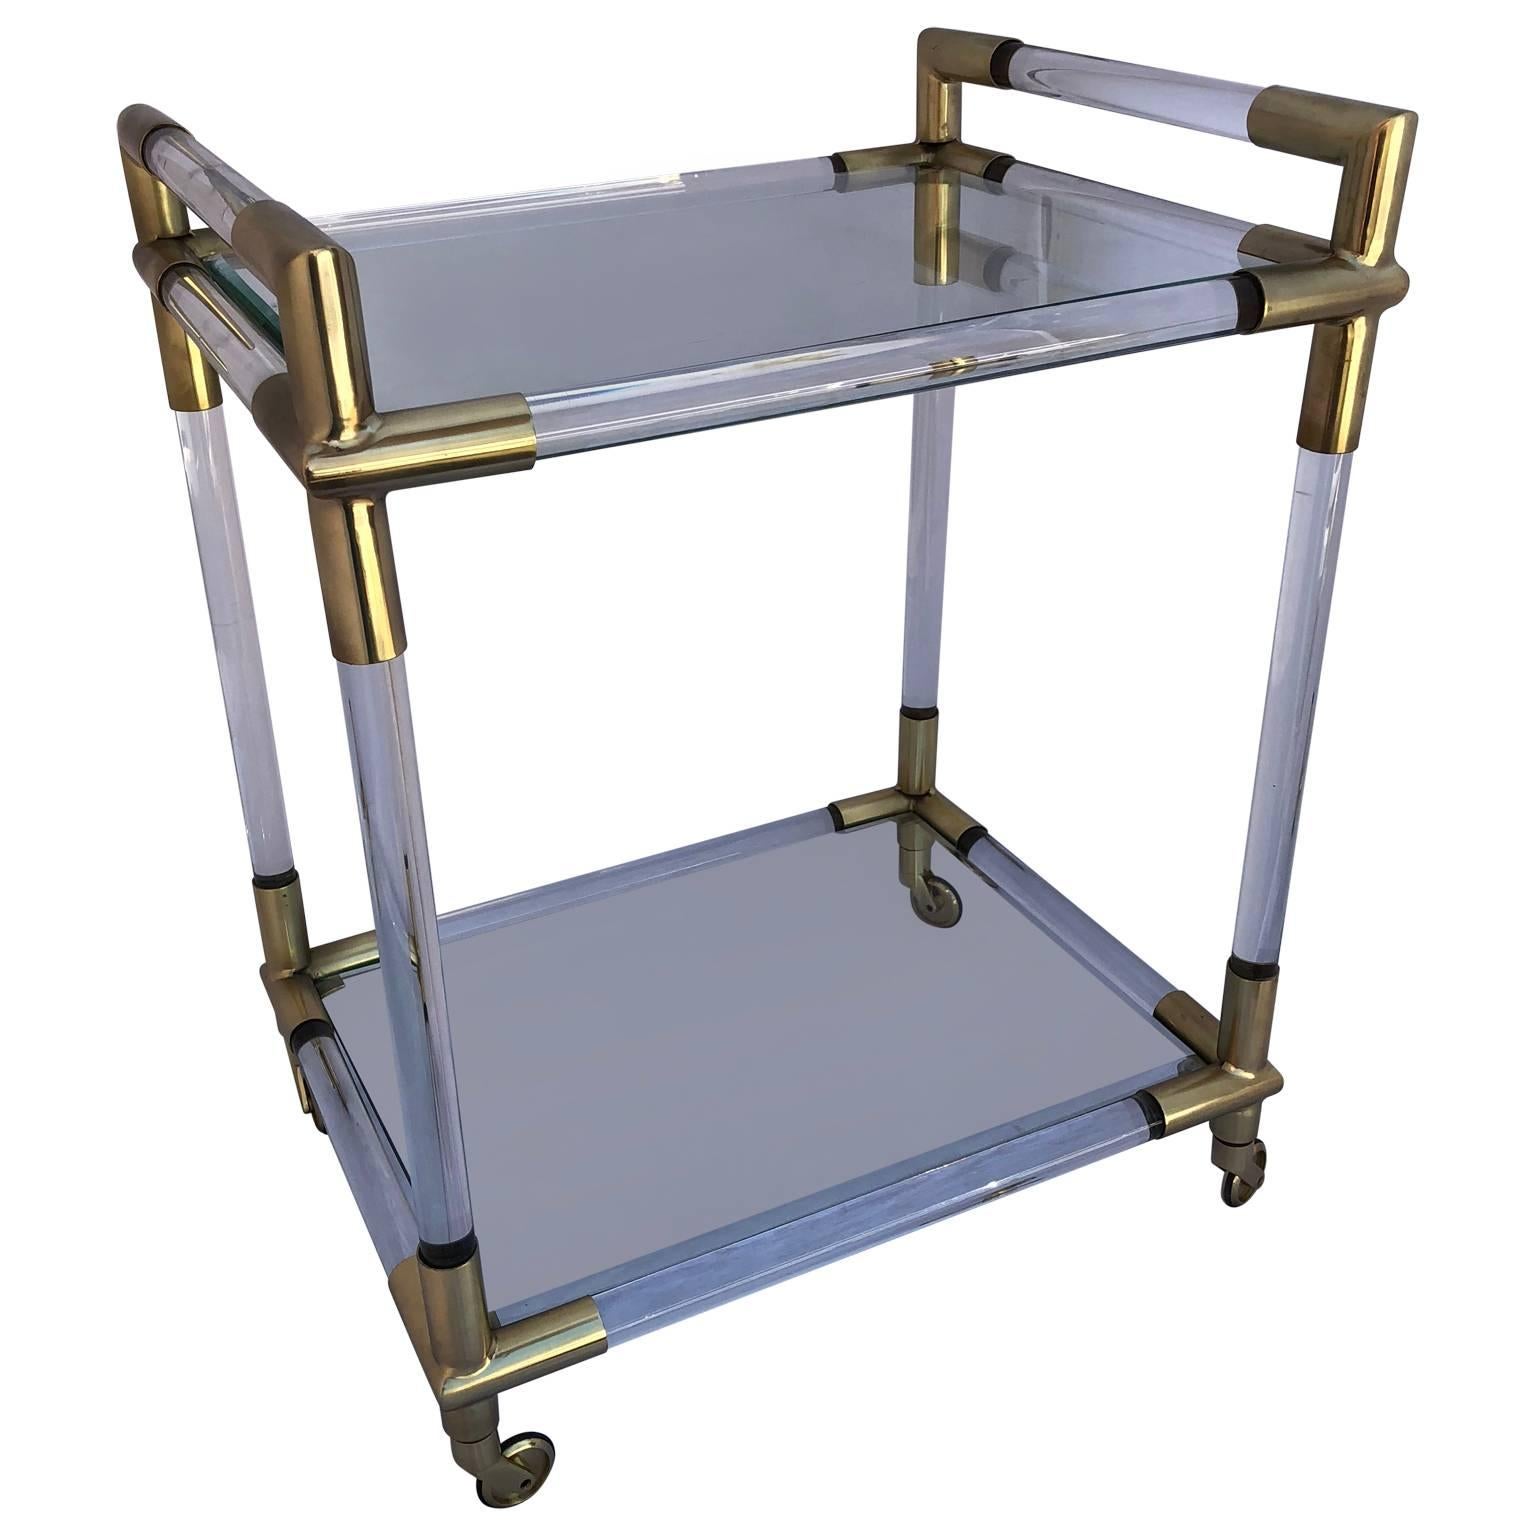 Amazing vintage Italian glass and brass bar cart in the style of Hollis Jones
The two glass shelves have handcrafted bevelled edges, see included image.
Optional 8-12 hour Tri-State & DC snap delivery can be accommodated

$125 flat rate front door